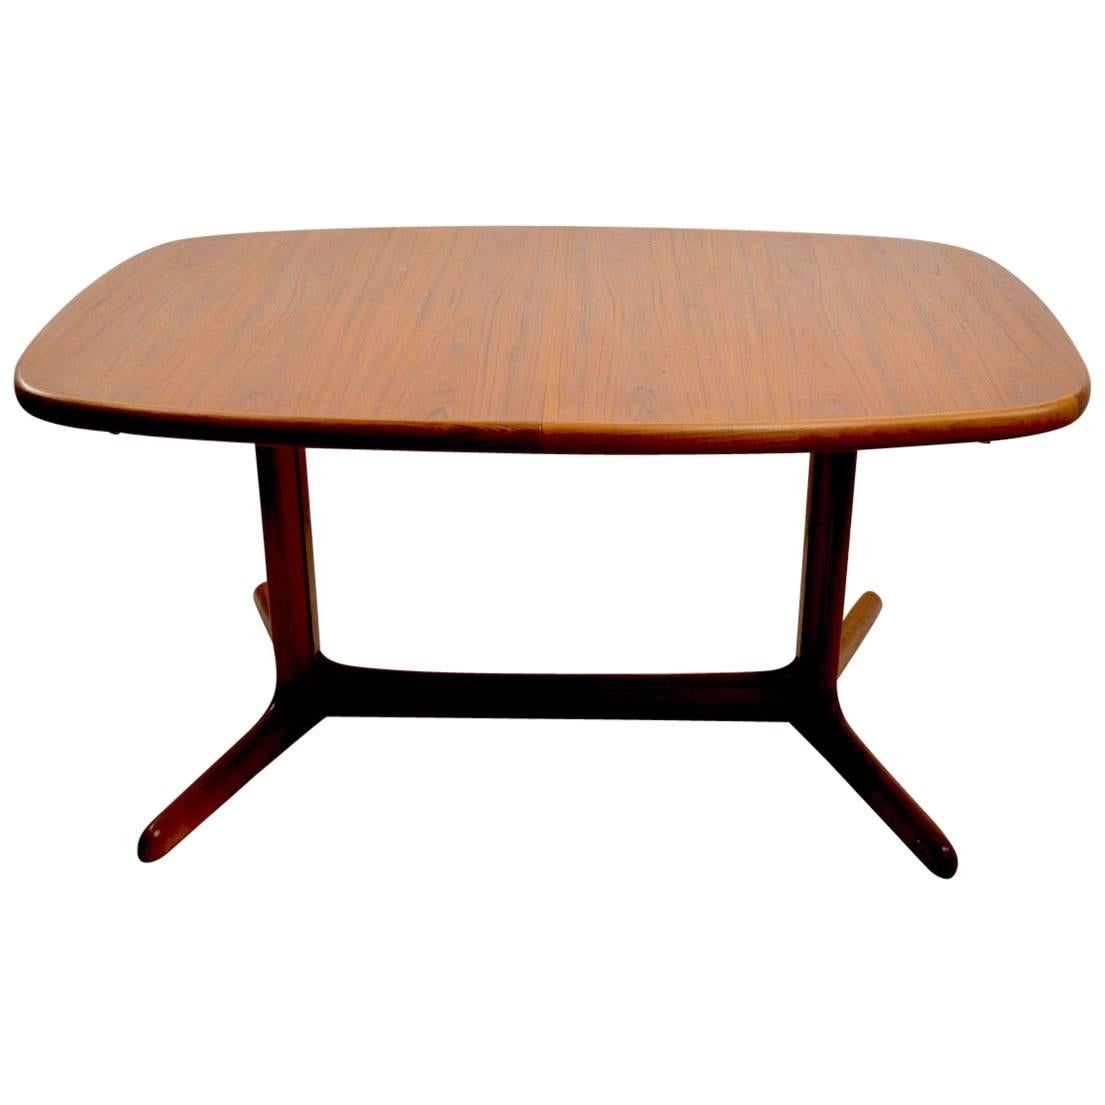 Teak Danish Dining Table with Two Leaves